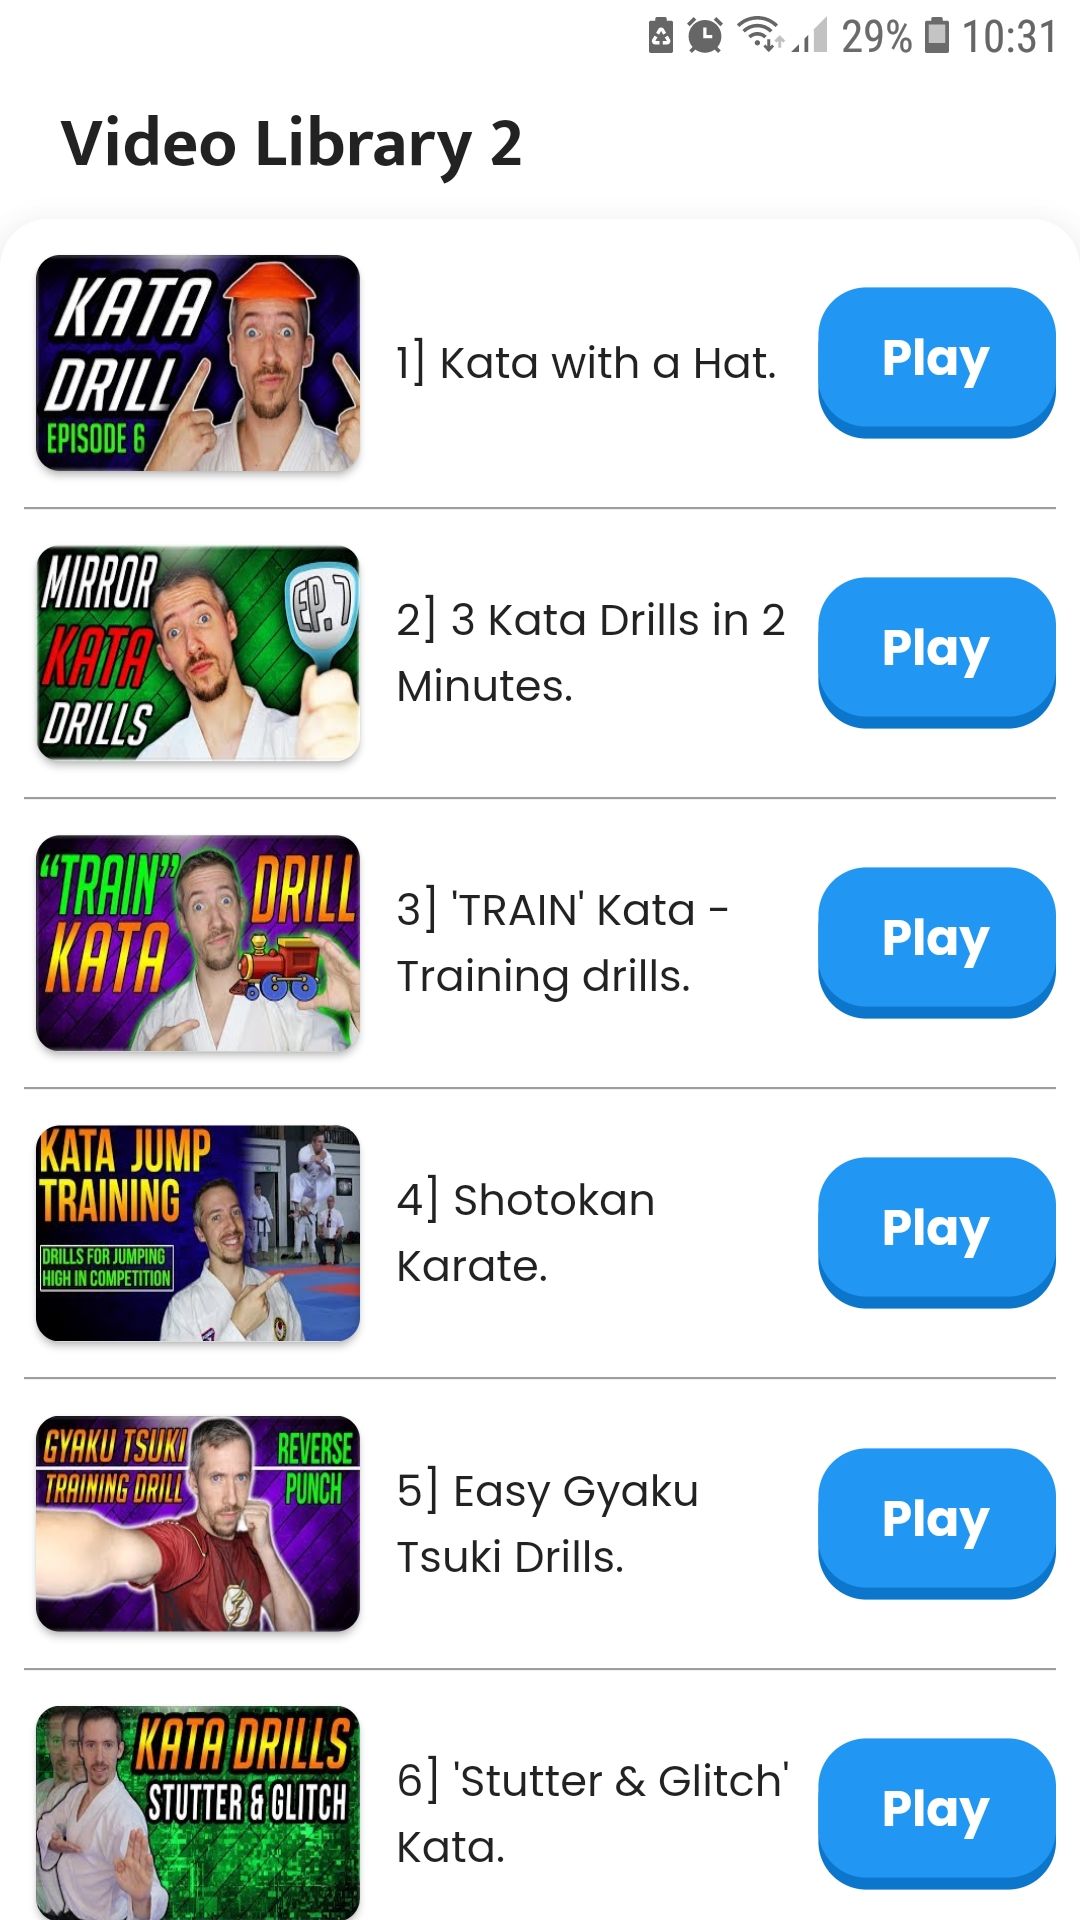 Karate training techniques video library 2 mobile app